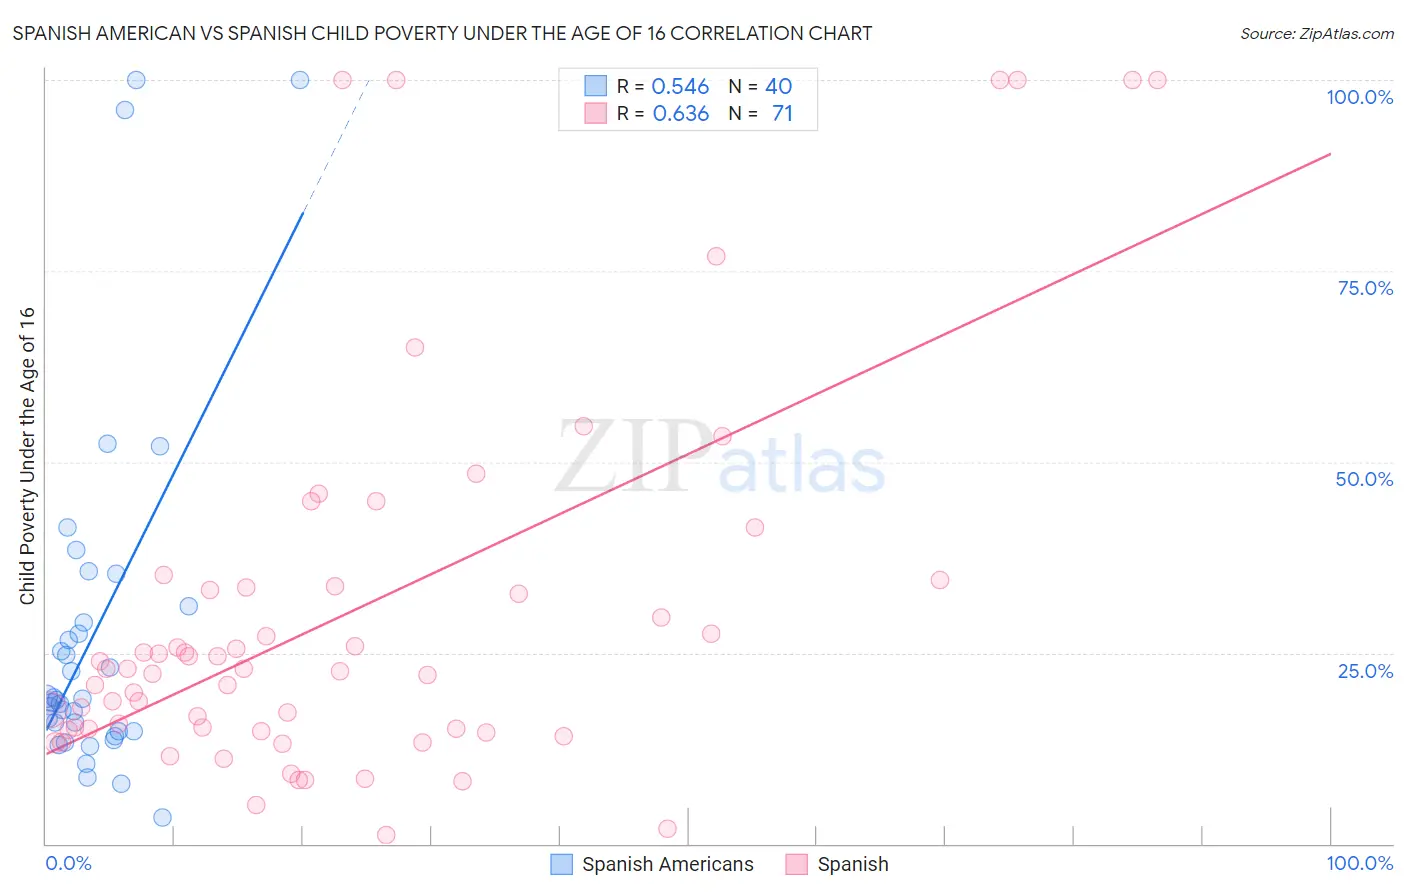 Spanish American vs Spanish Child Poverty Under the Age of 16